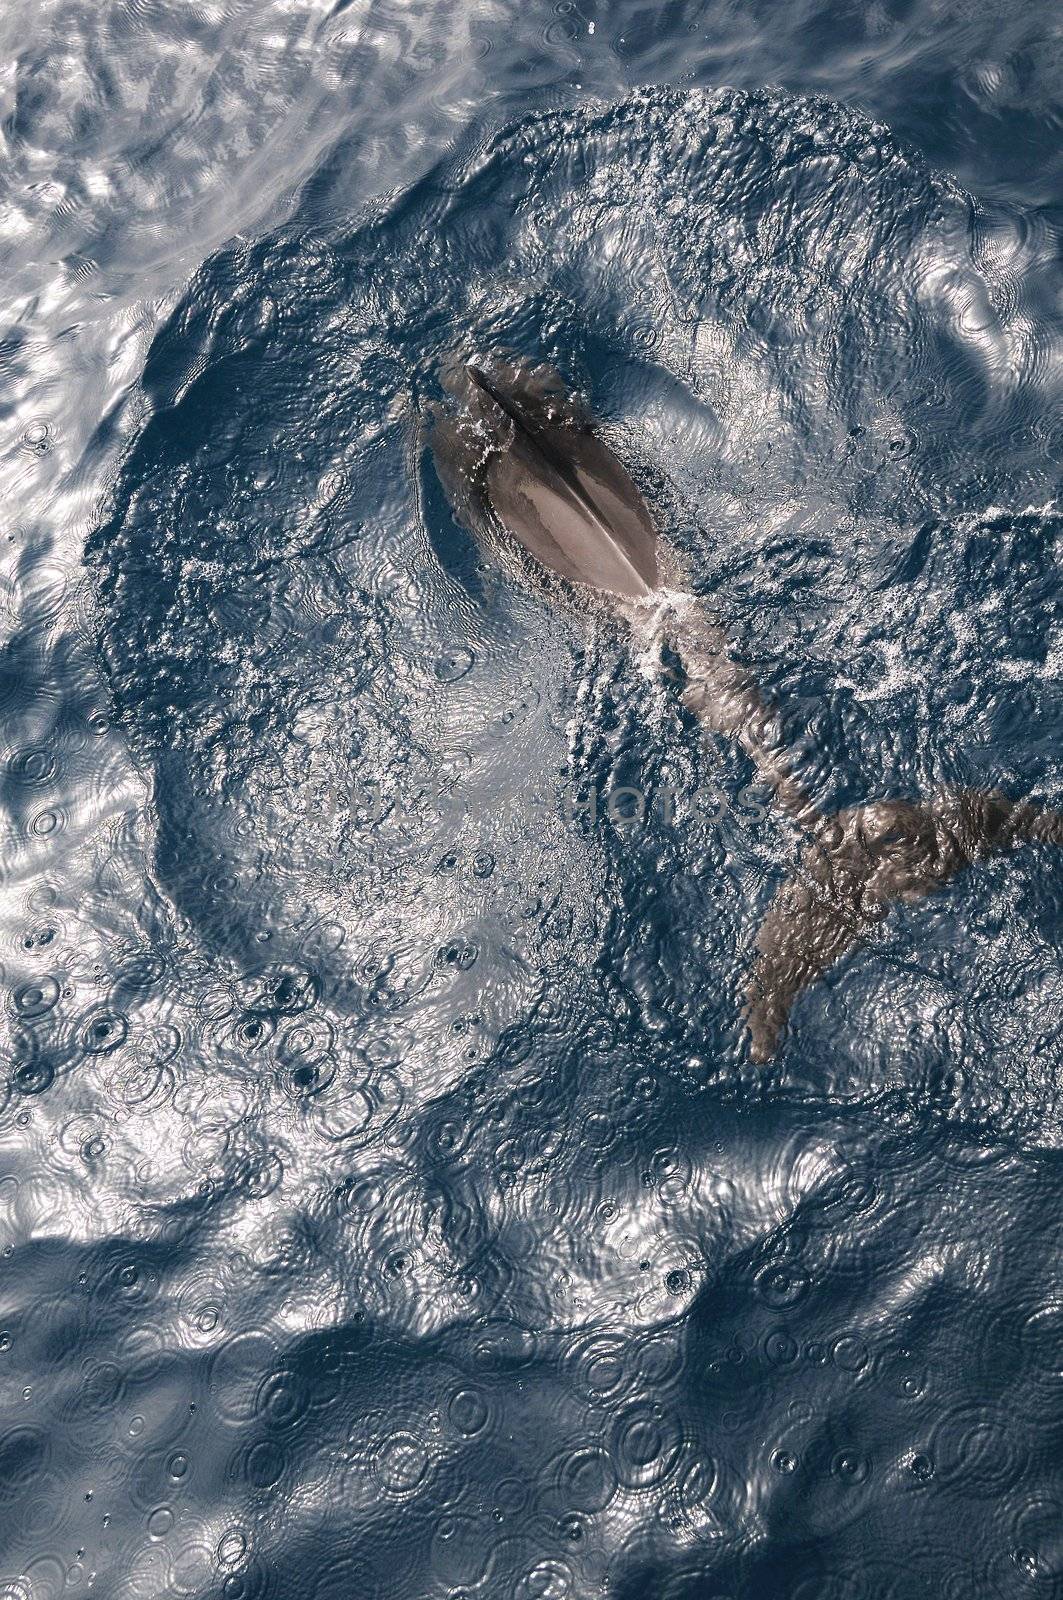 Tail of swimming dolphin with splashes in dark key